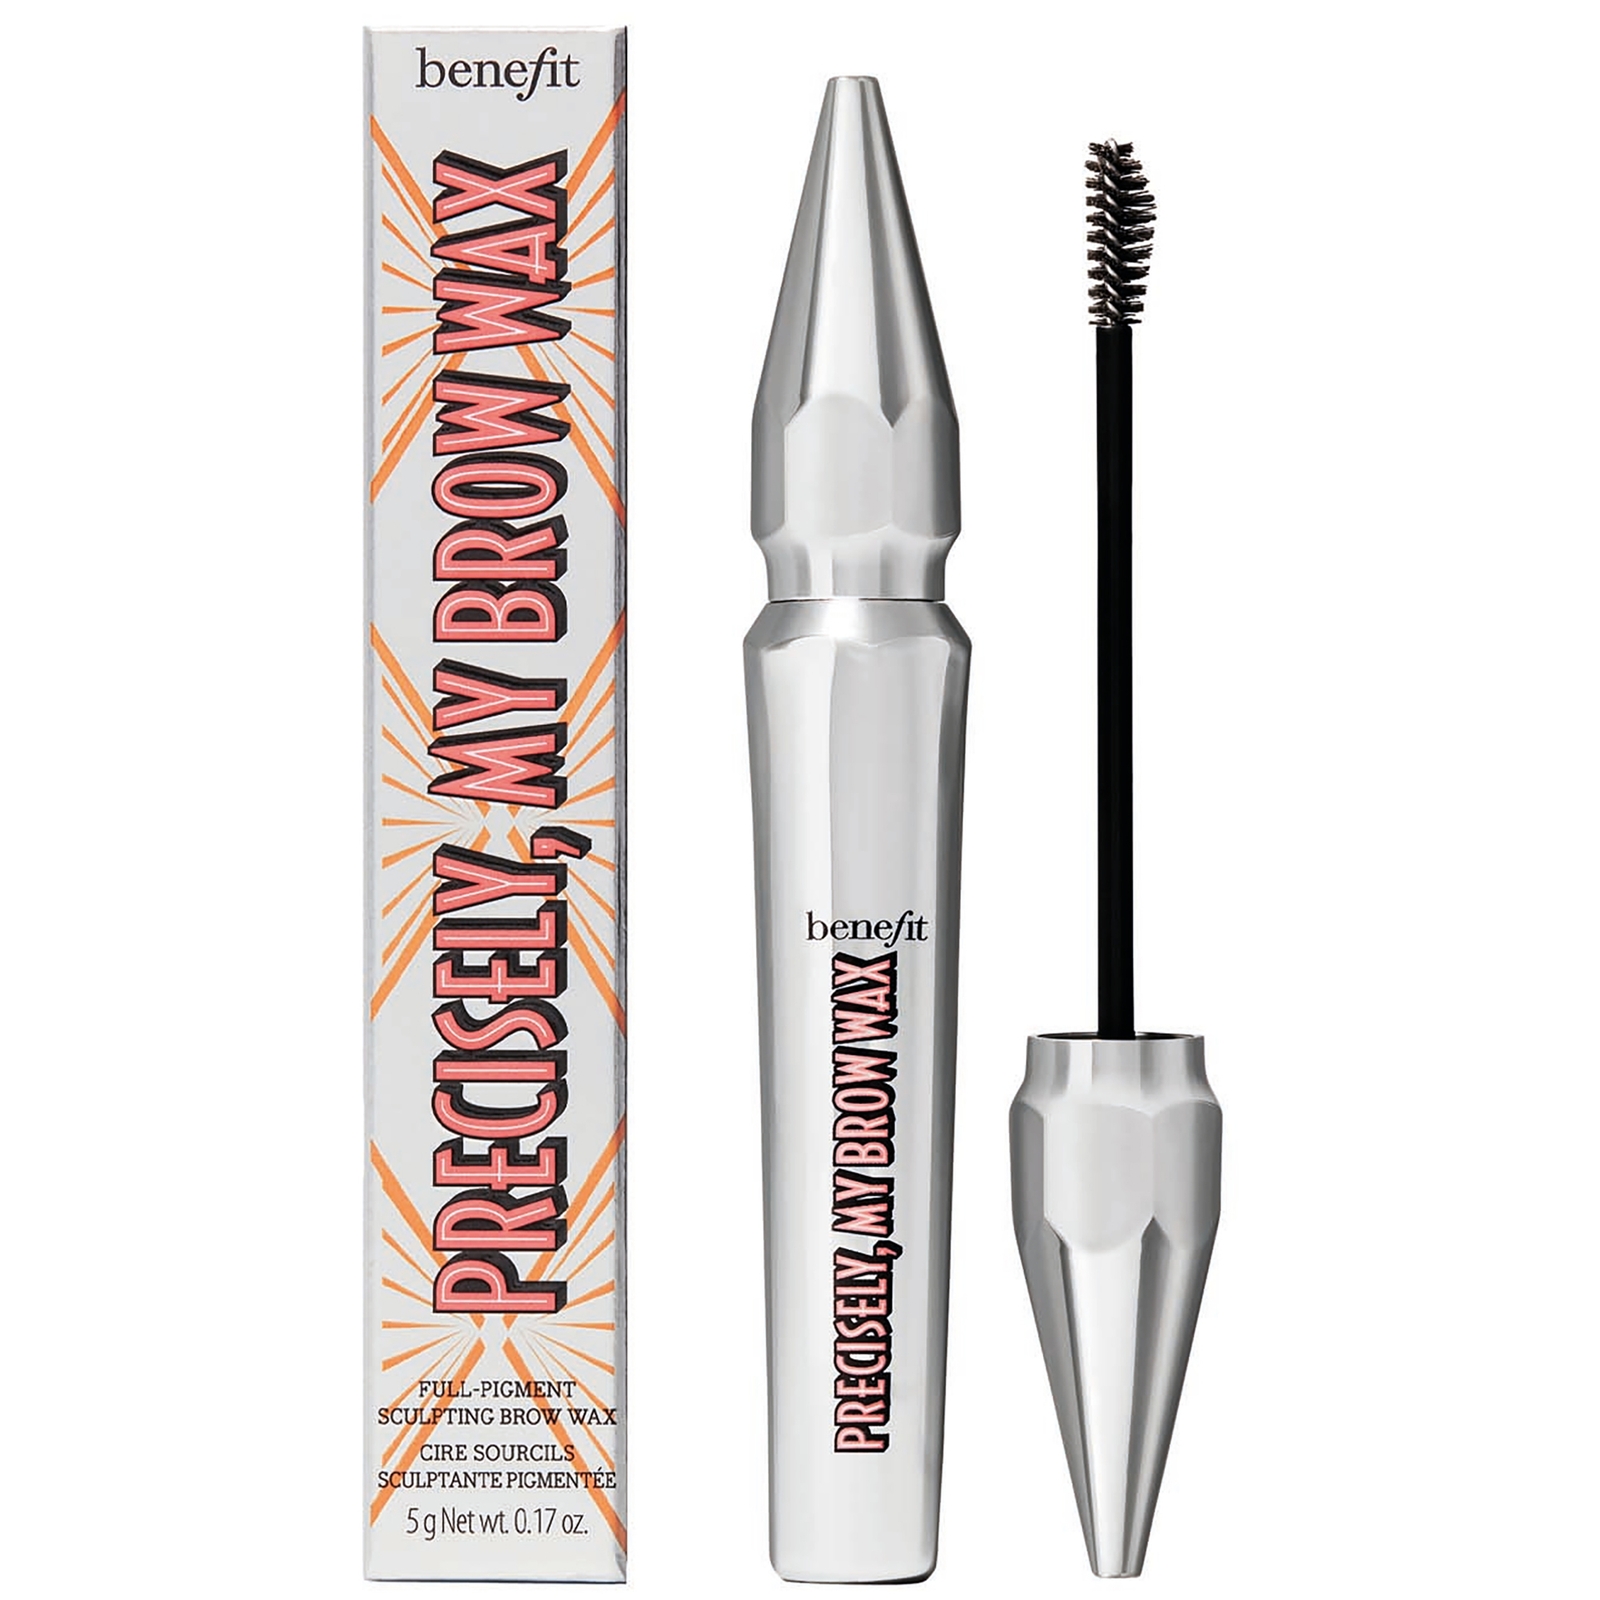 benefit Precisely My Brow Full Pigment Sculpting Brow Wax 5g (Various Shades) - 6 Cool Soft Black